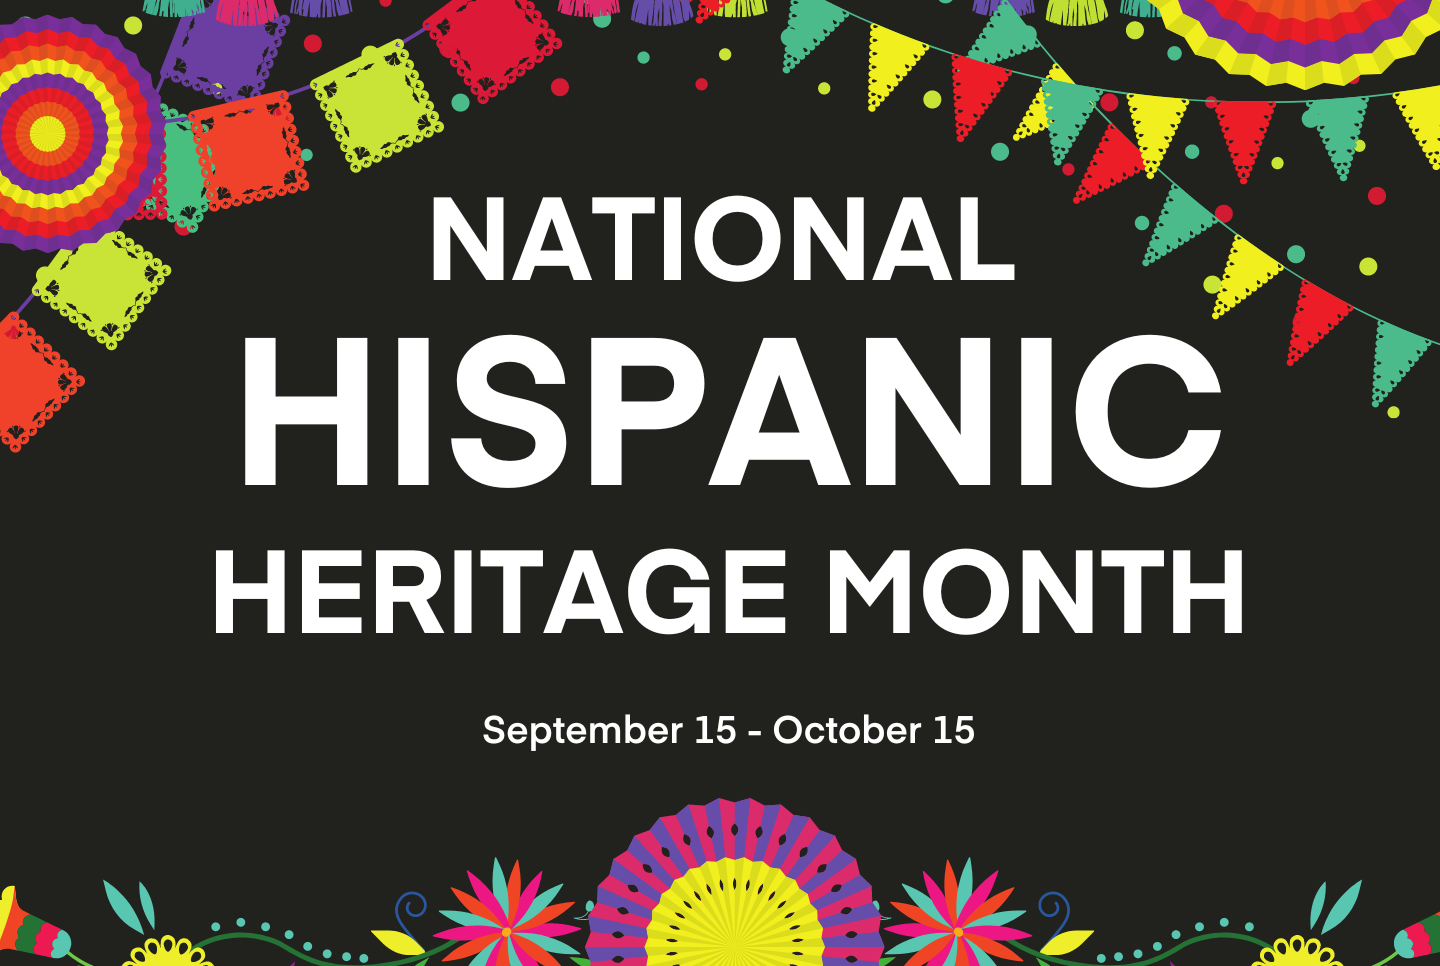 Hispanic Heritage Month in the United States runs from September 15 - October 15. Chain.io shares leaders in the supply chain industry and the importance of supply chain diversity. 